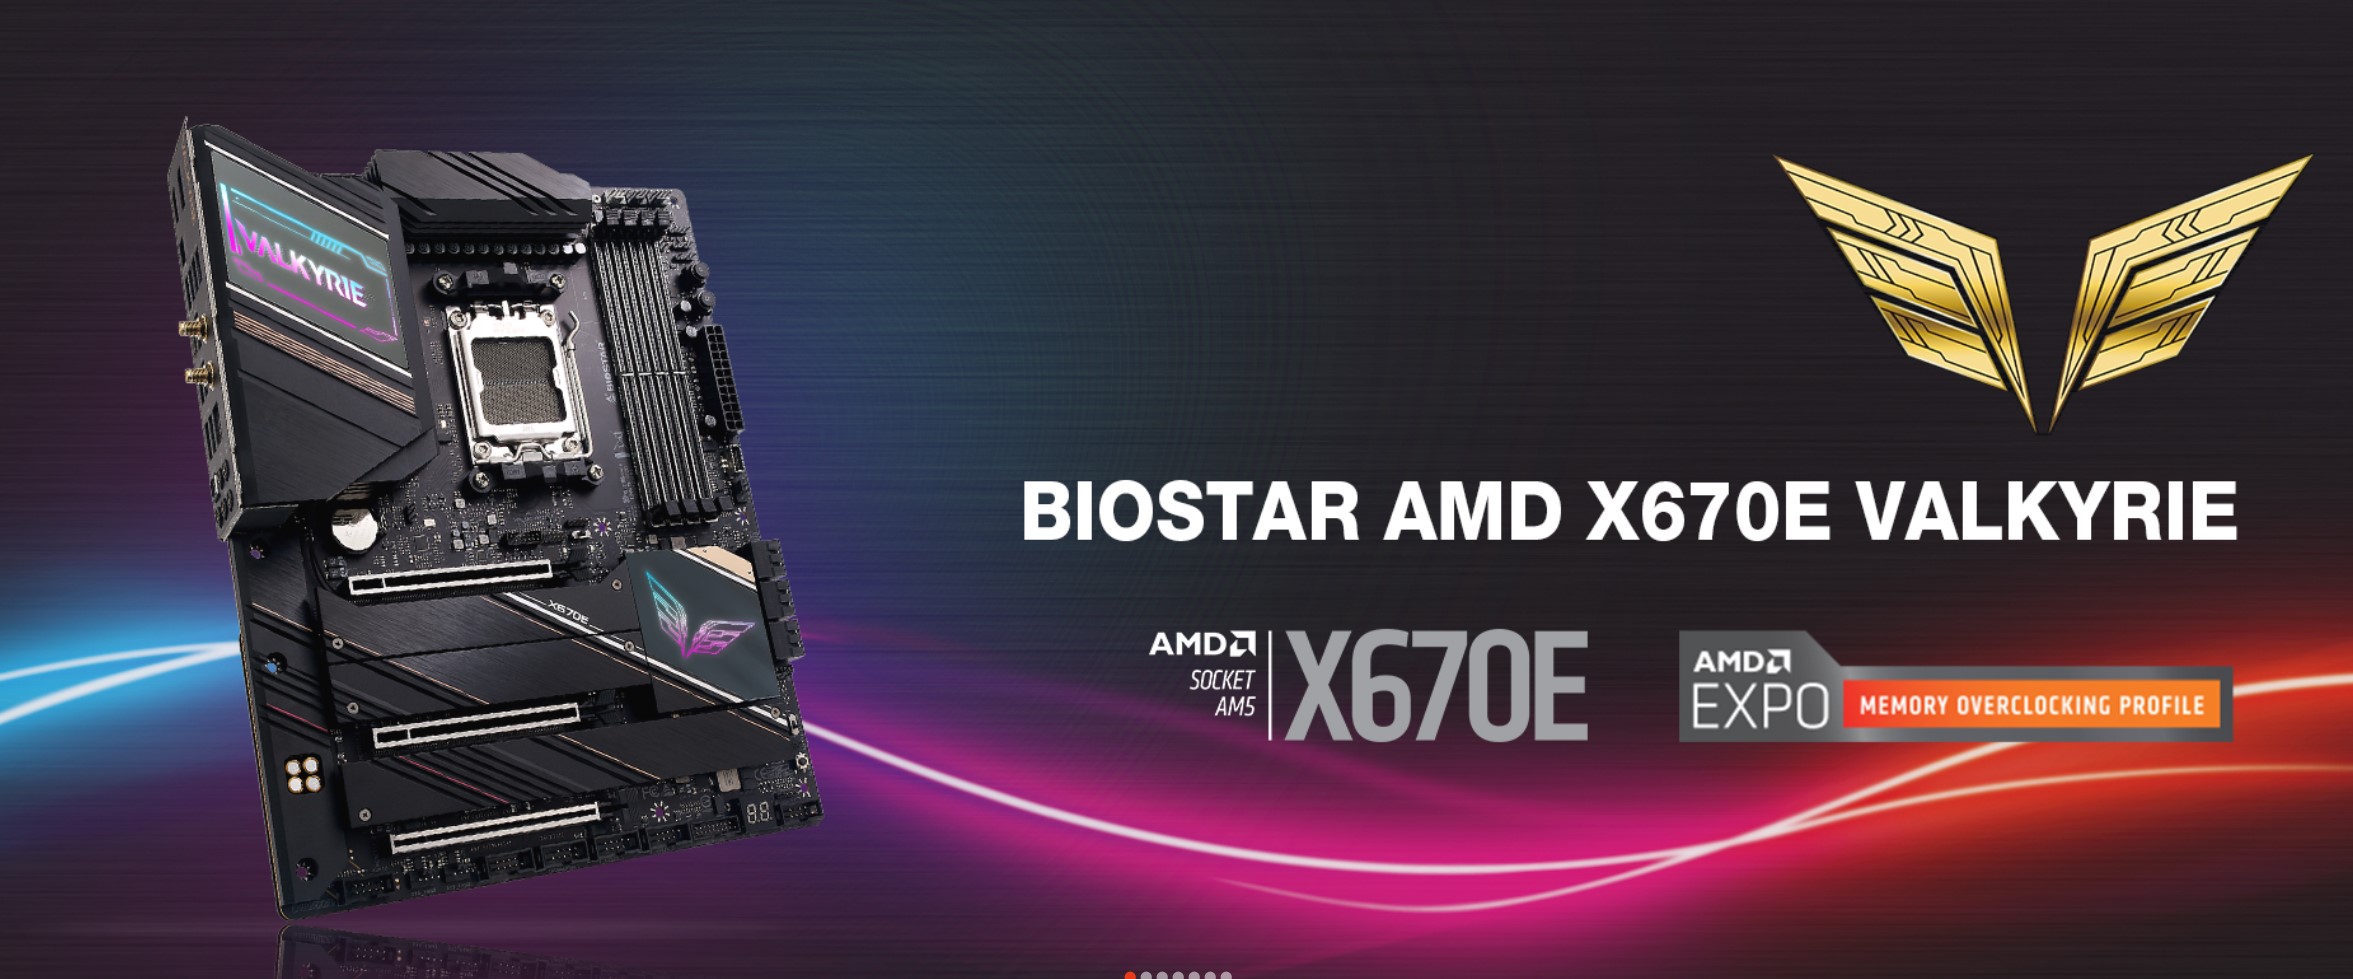 BIOSTAR presents the new X670E VALKYRIE ATX motherboard designed based on the AMD X670 chipset, GamersRD